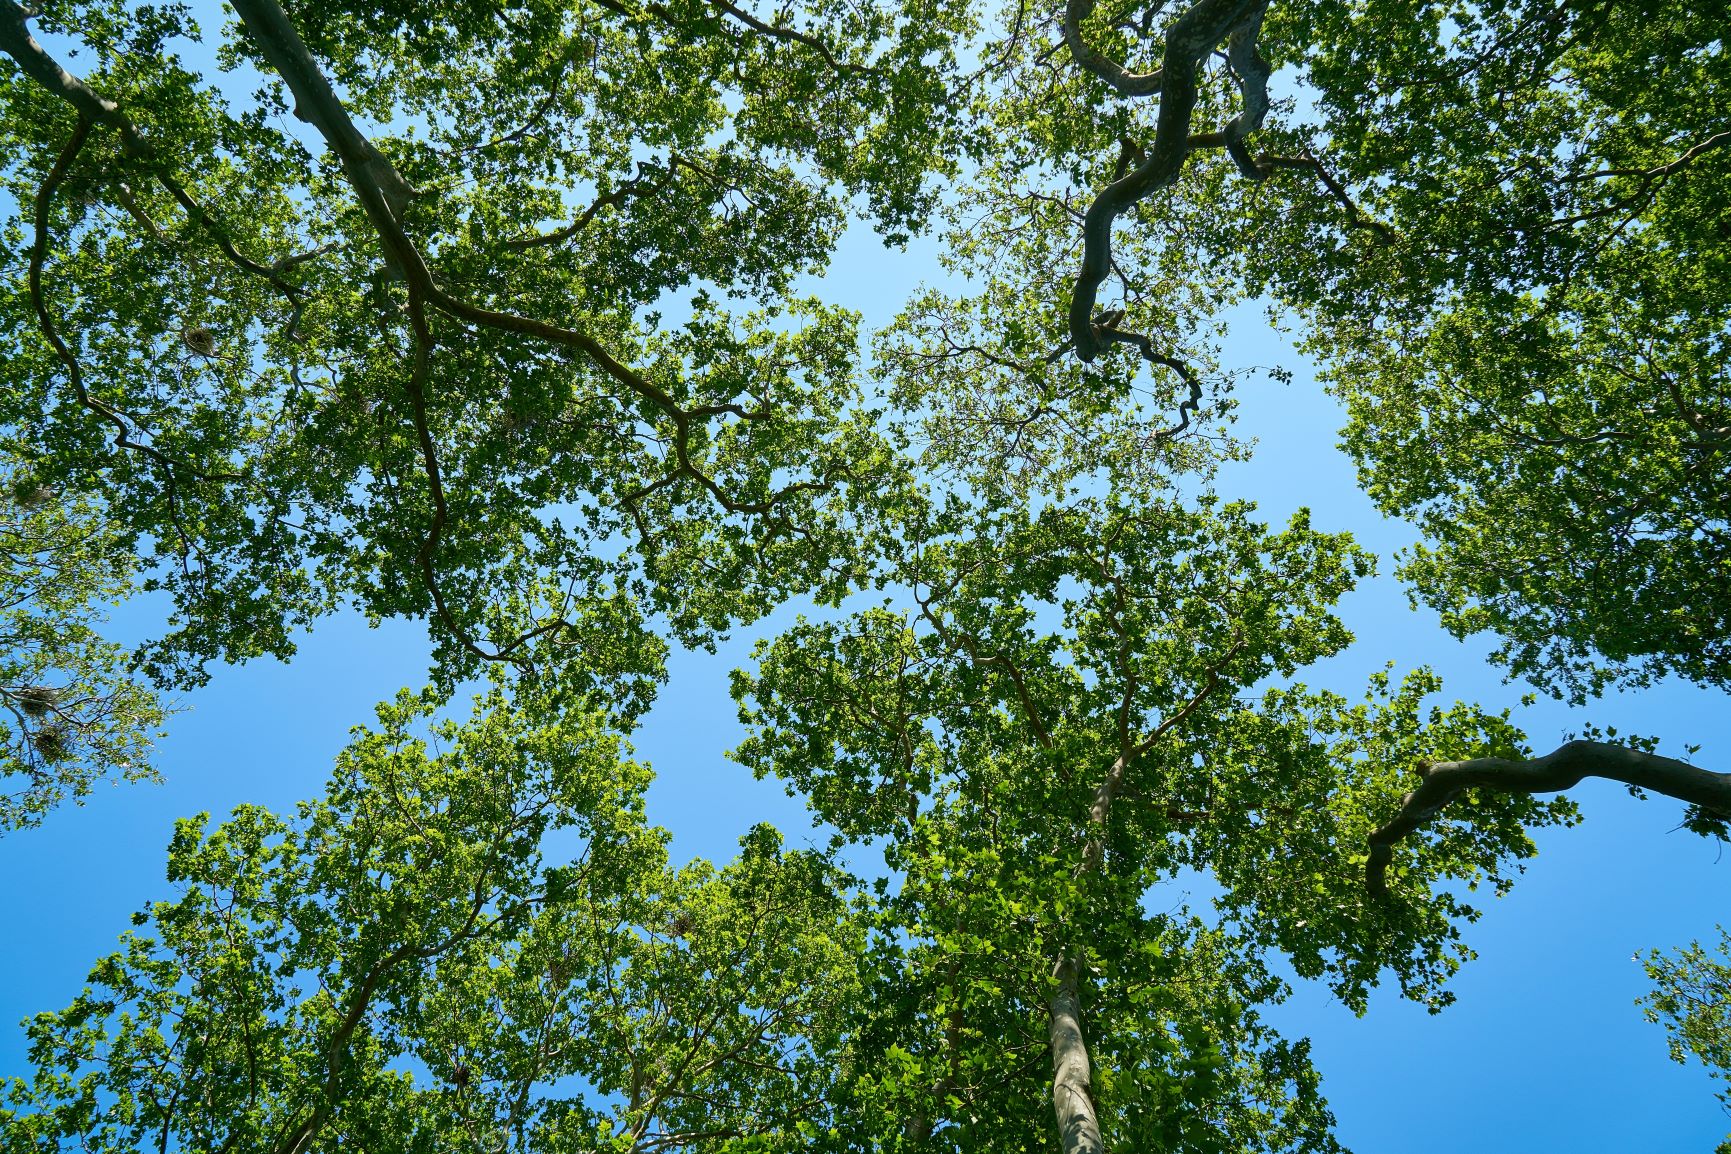 Looking up to the blue sky from underneath lush green trees